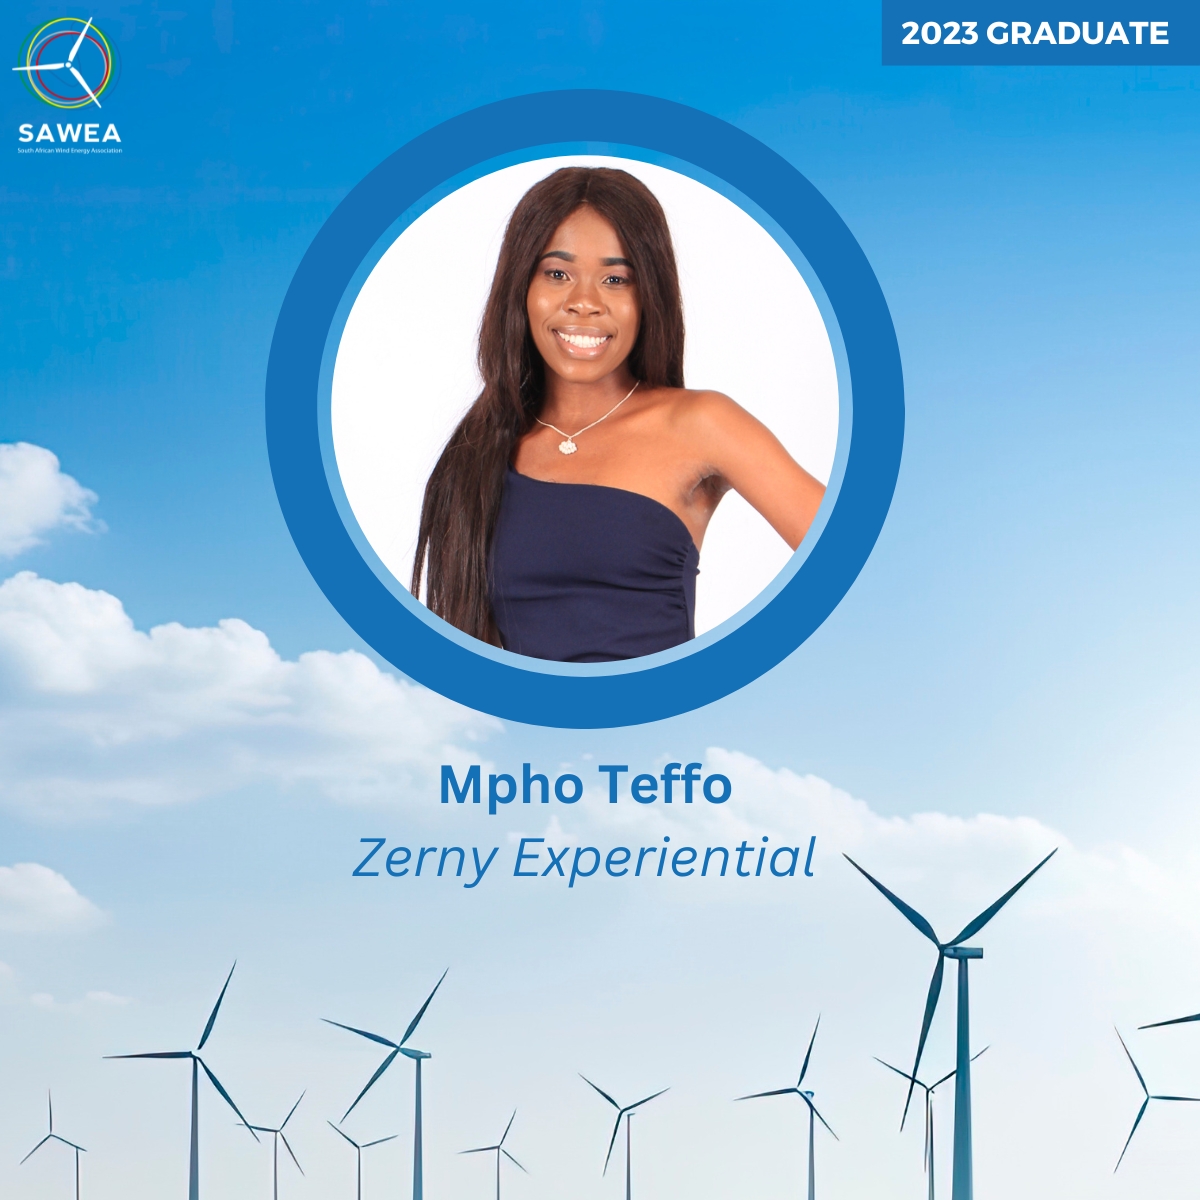 GRADUATION SEASON 🏆 Congratulations to Zerny Experential's intern, Mpho Teffo for completing her Advanced Diploma in Labour Relations Management at Tshwane University of Technology. #2023graduate #leadingwithwind #sawea